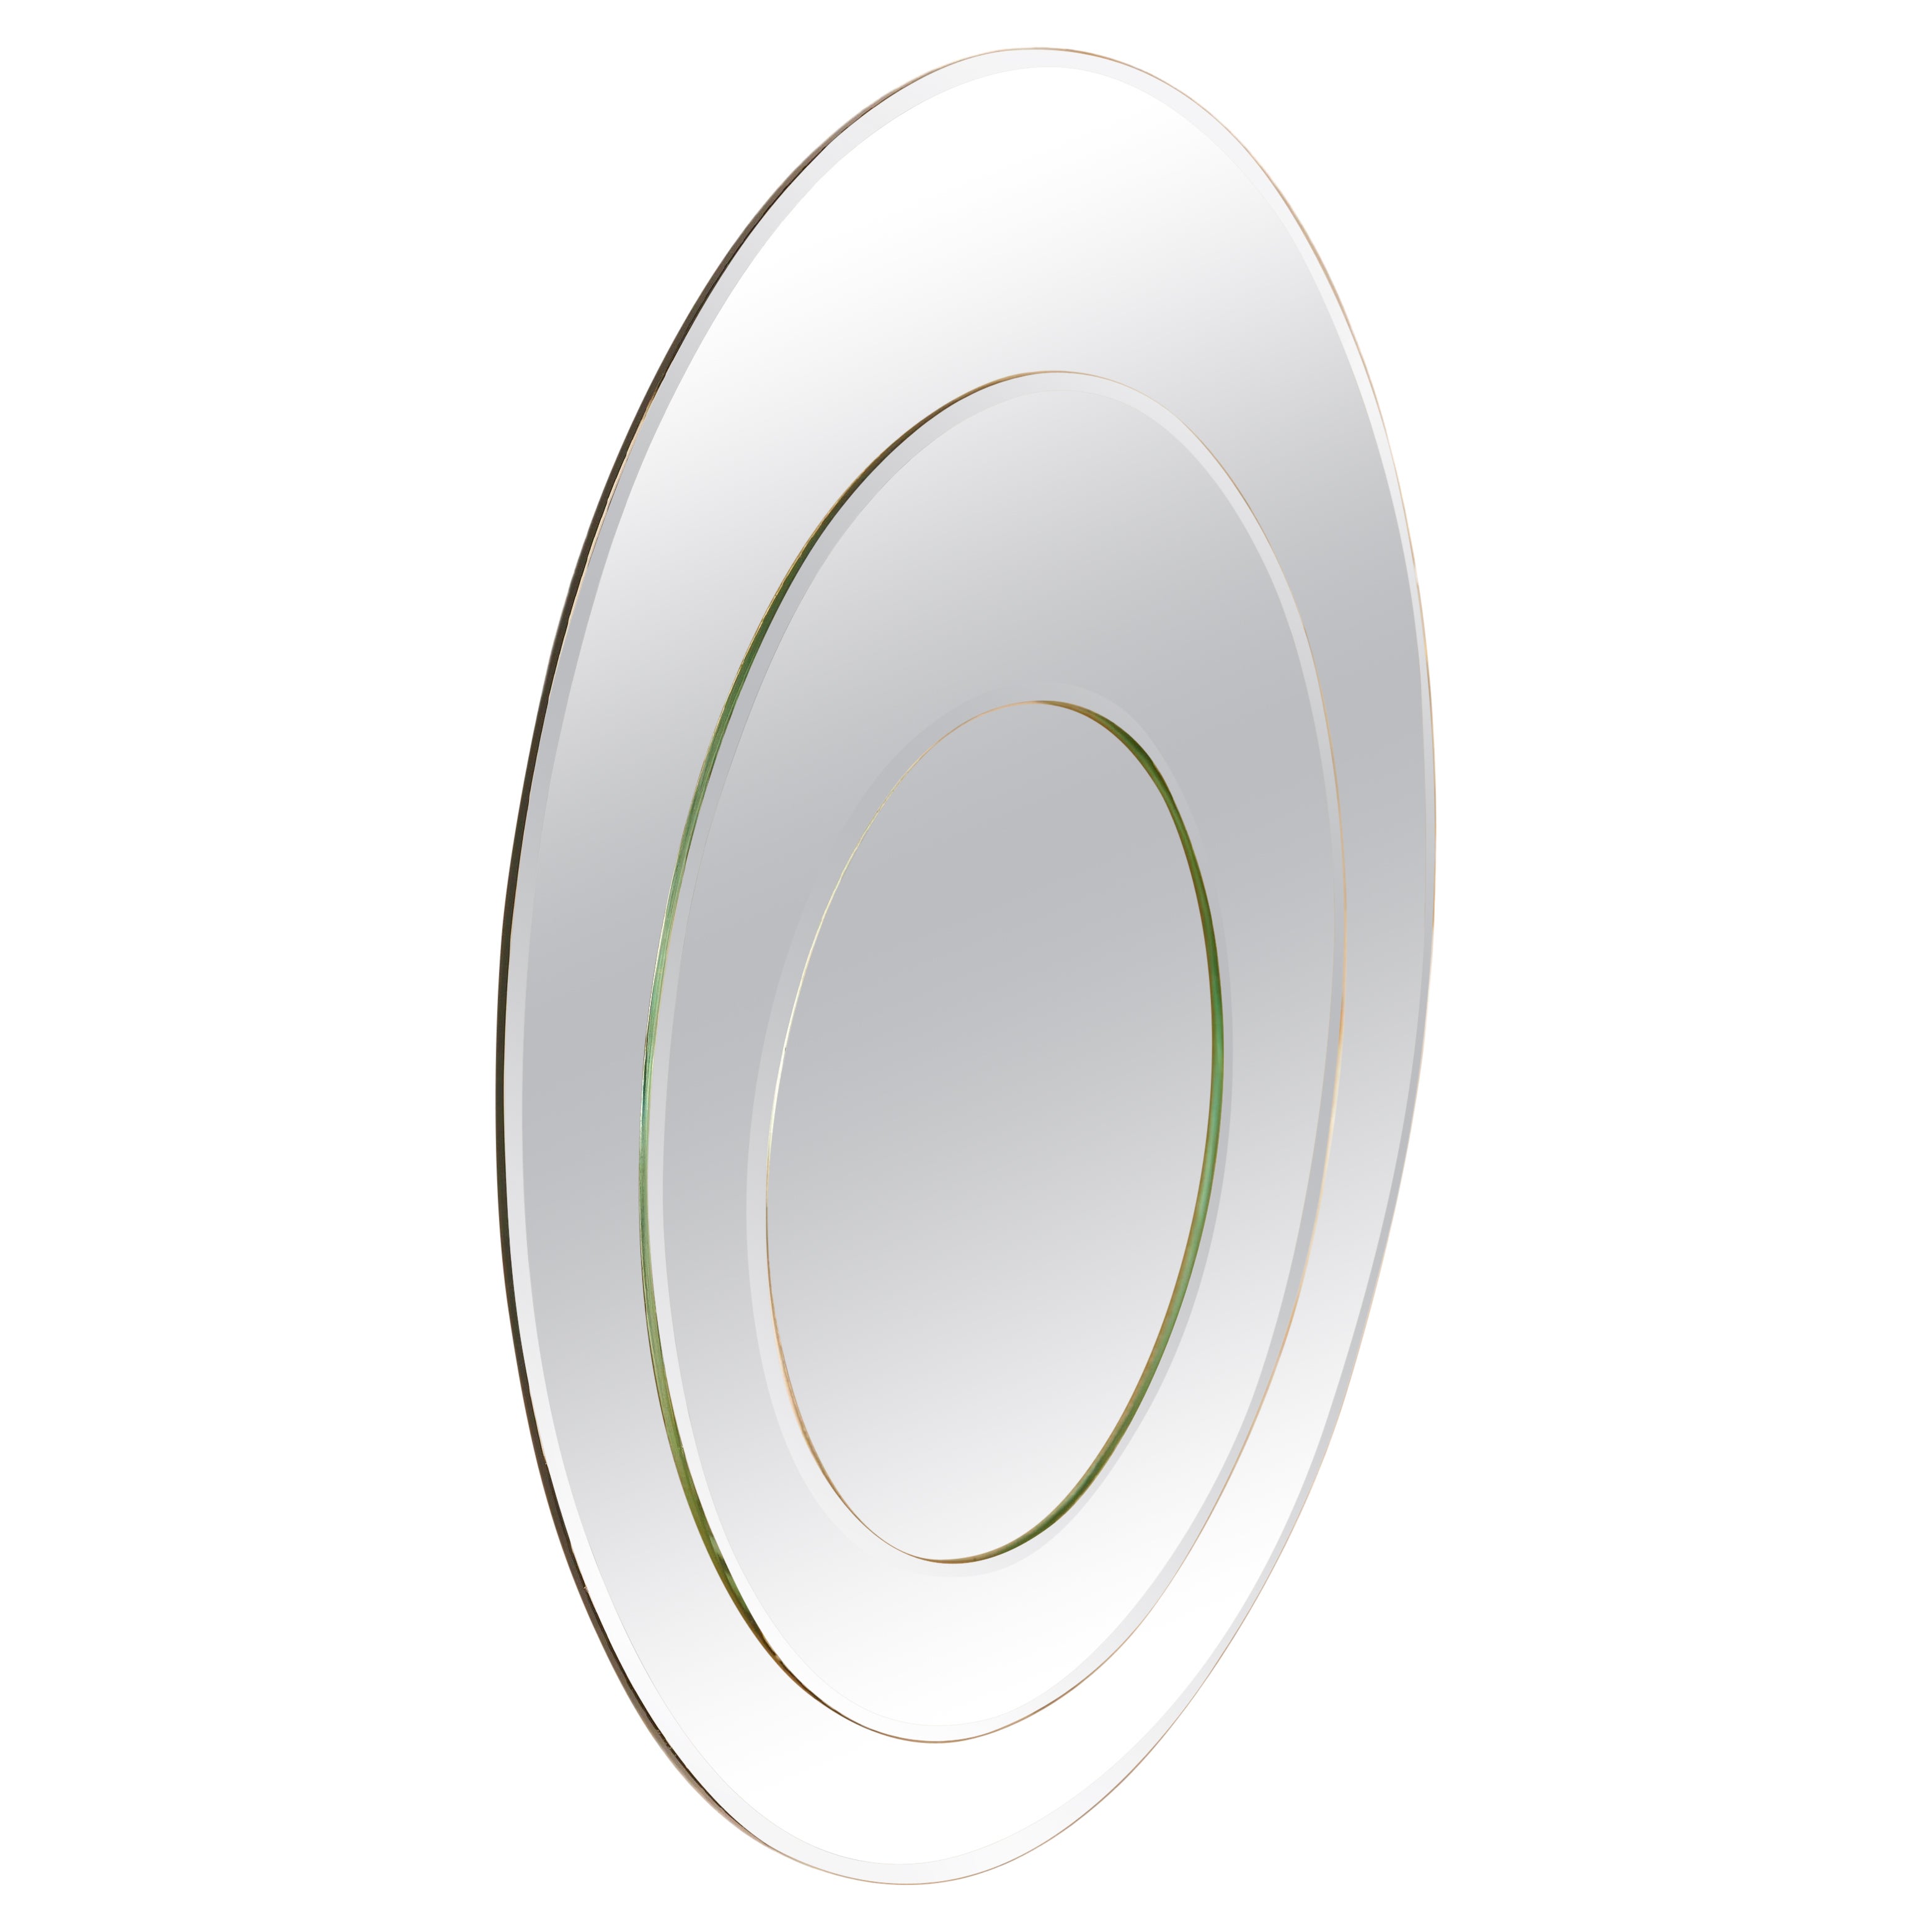 Circular Mirror with Beveled Glass